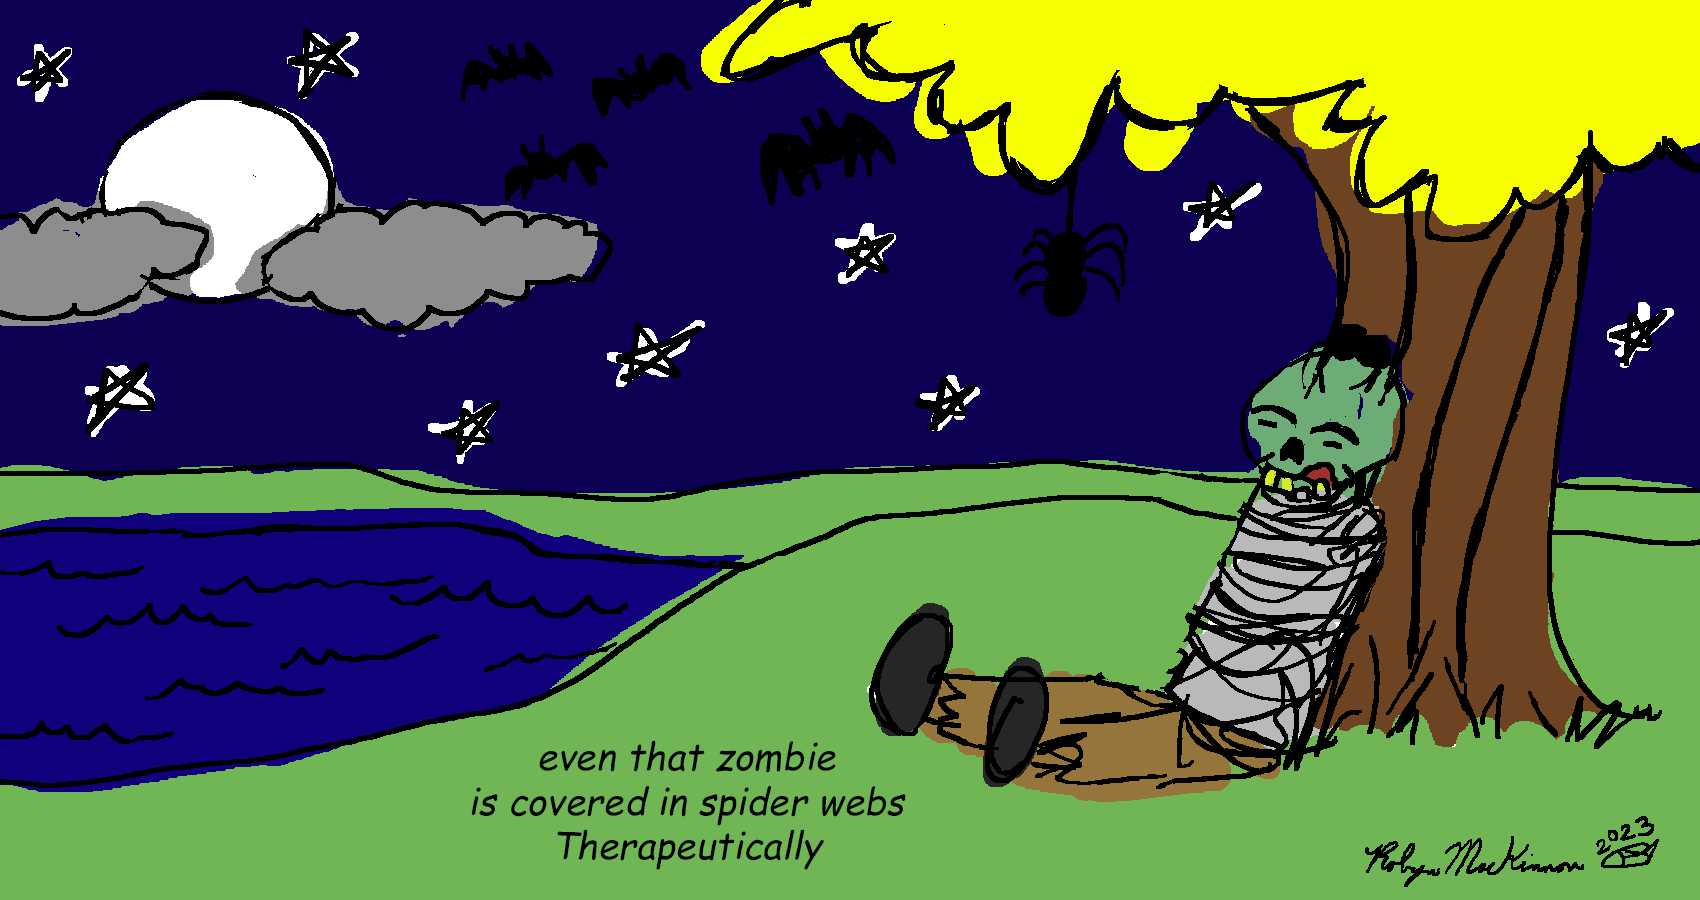 Spiderweb Therapy, haiku by Robyn MacKinnon at Spillwords.com